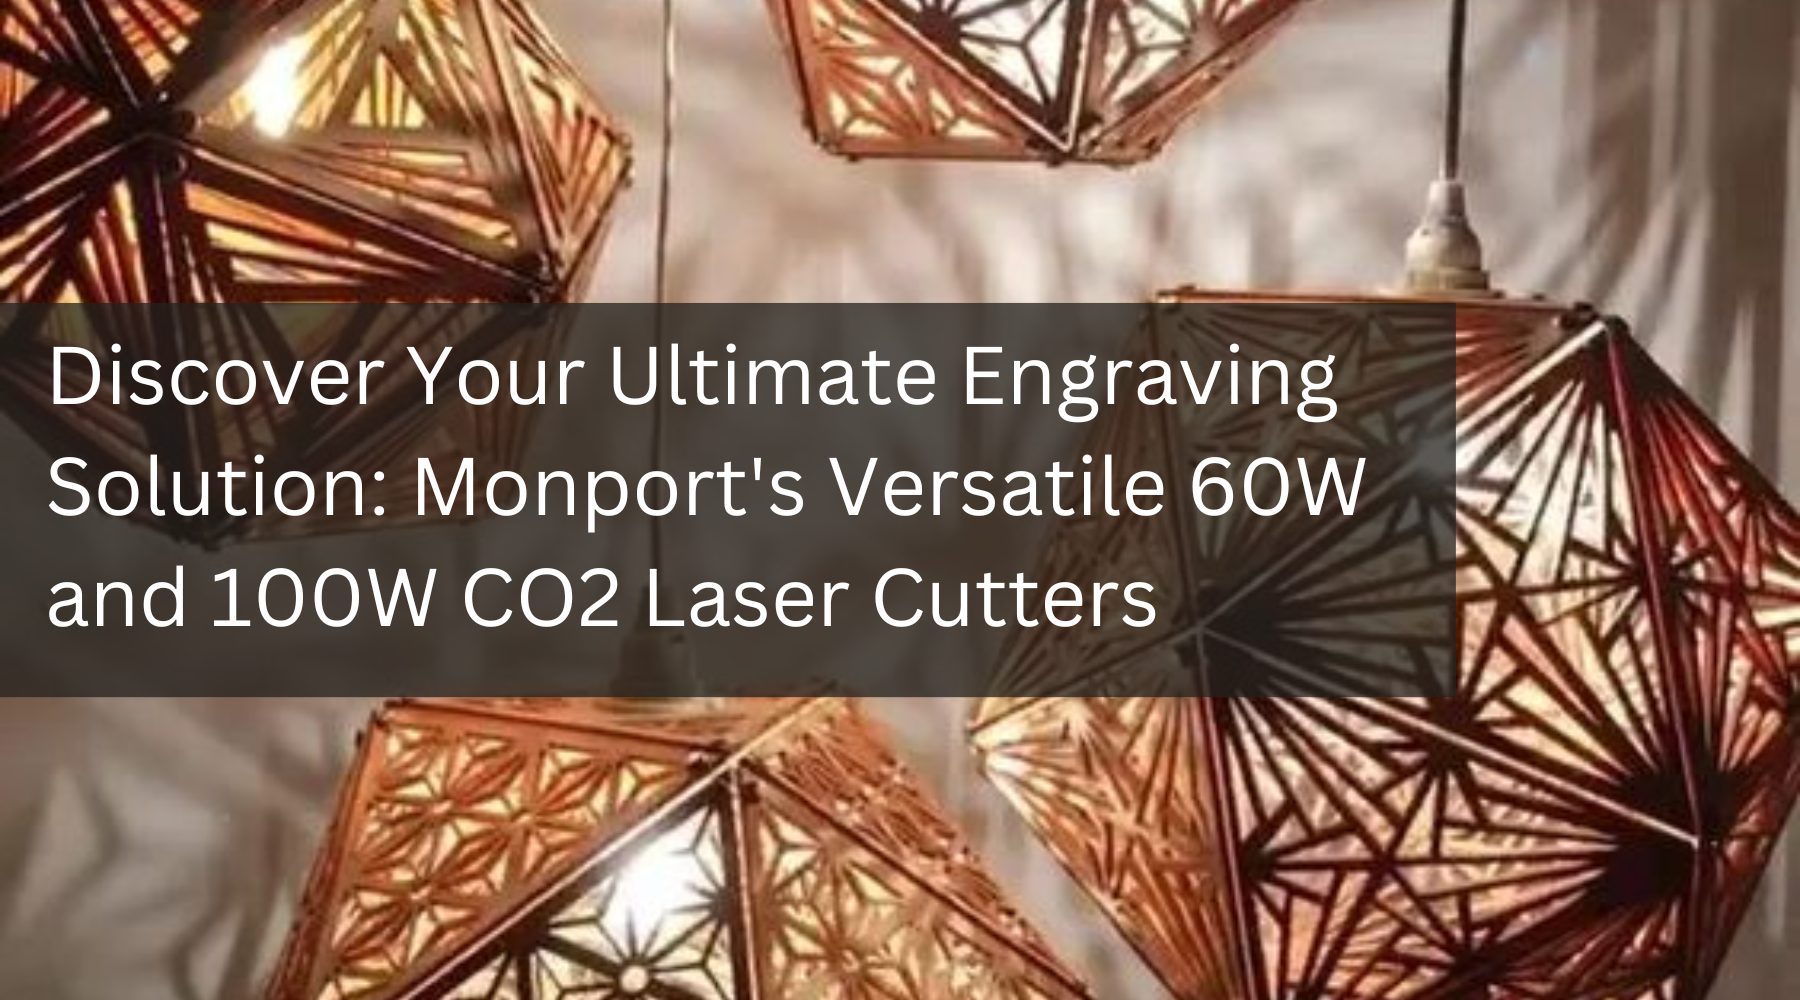 Discover Your Ultimate Engraving Solution: Monport's Versatile 60W and 100W CO2 Laser Cutters